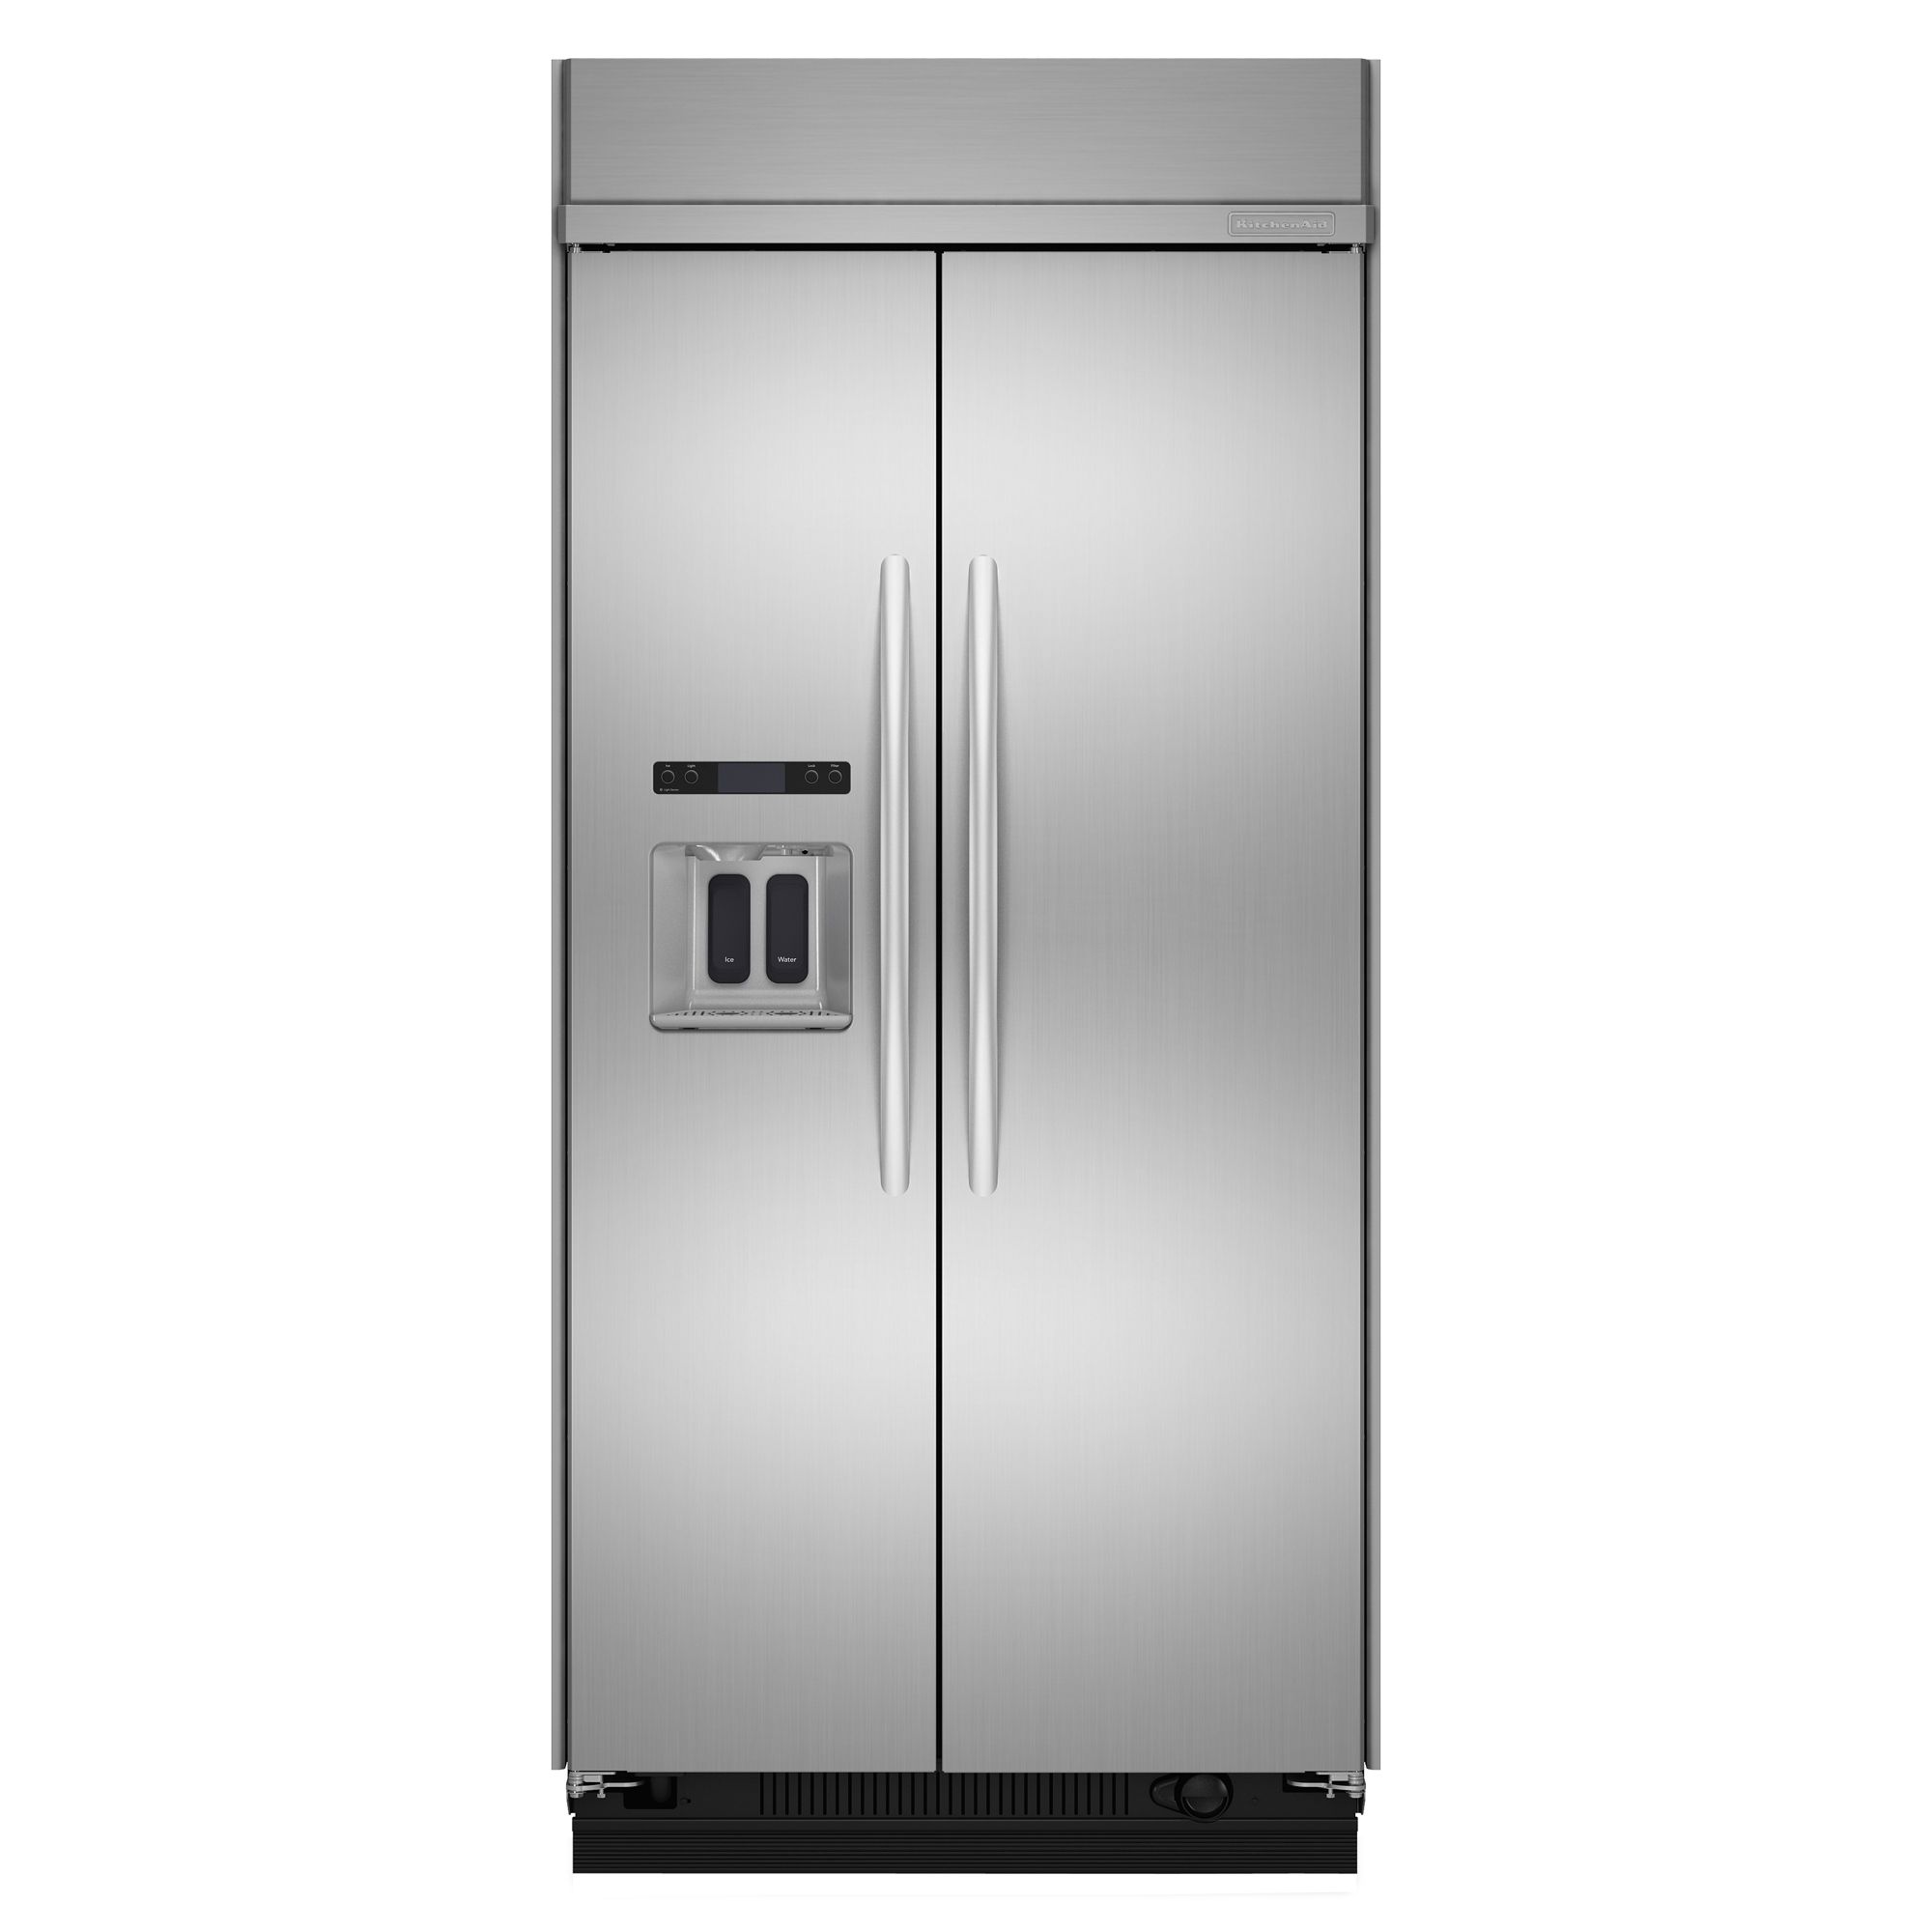 KitchenAid 25.3 cu. ft. Built-In Side-by-Side Refrigerator - Stainless Steel